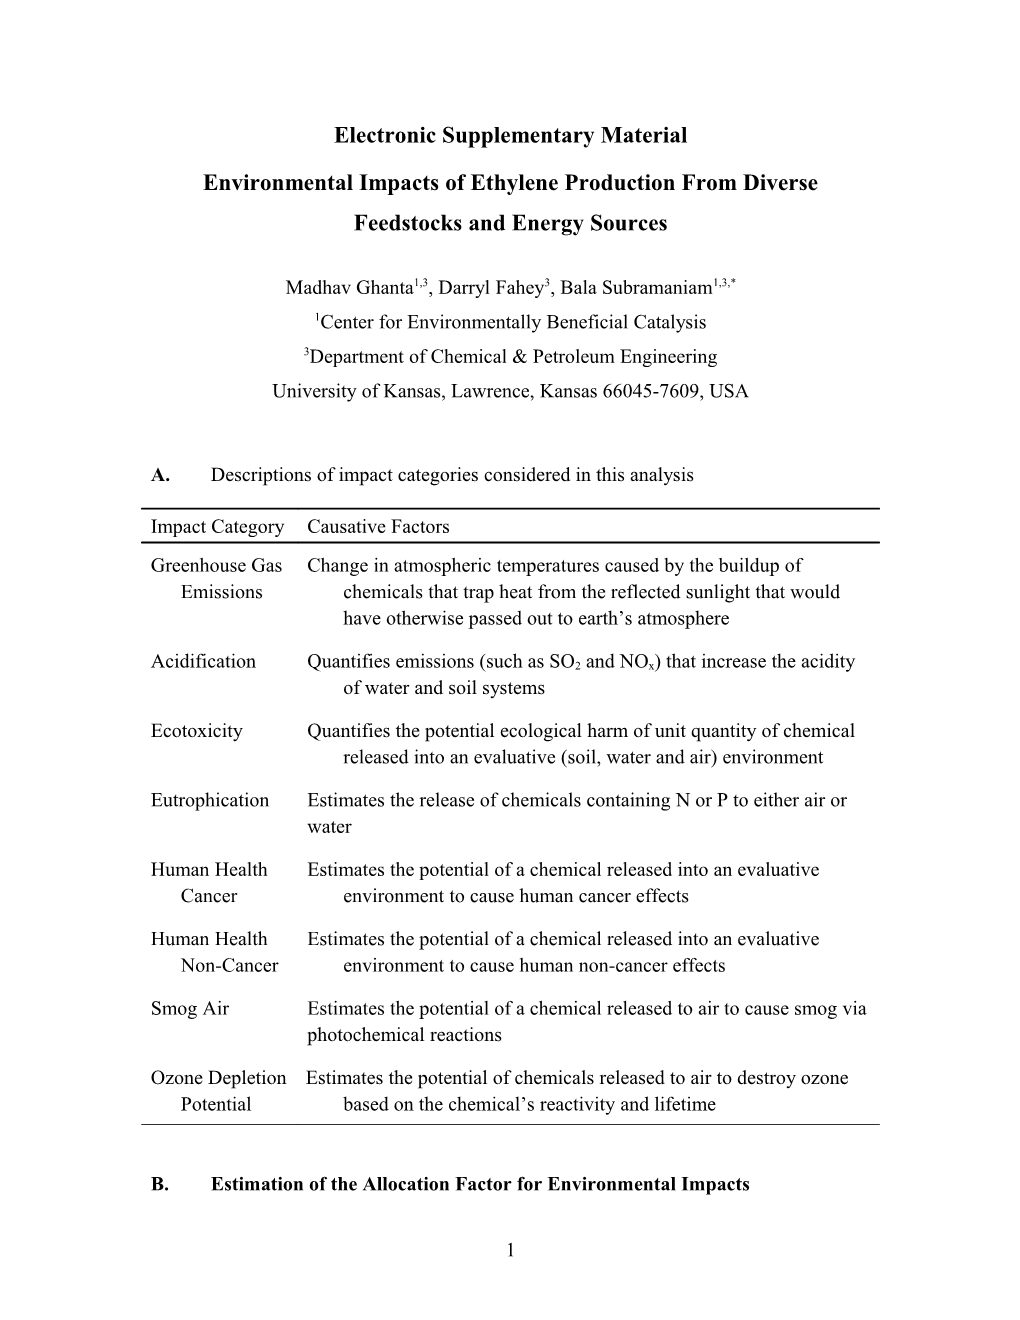 Environmental Impacts of Ethylene Production from Diverse Feedstocks and Energy Sources